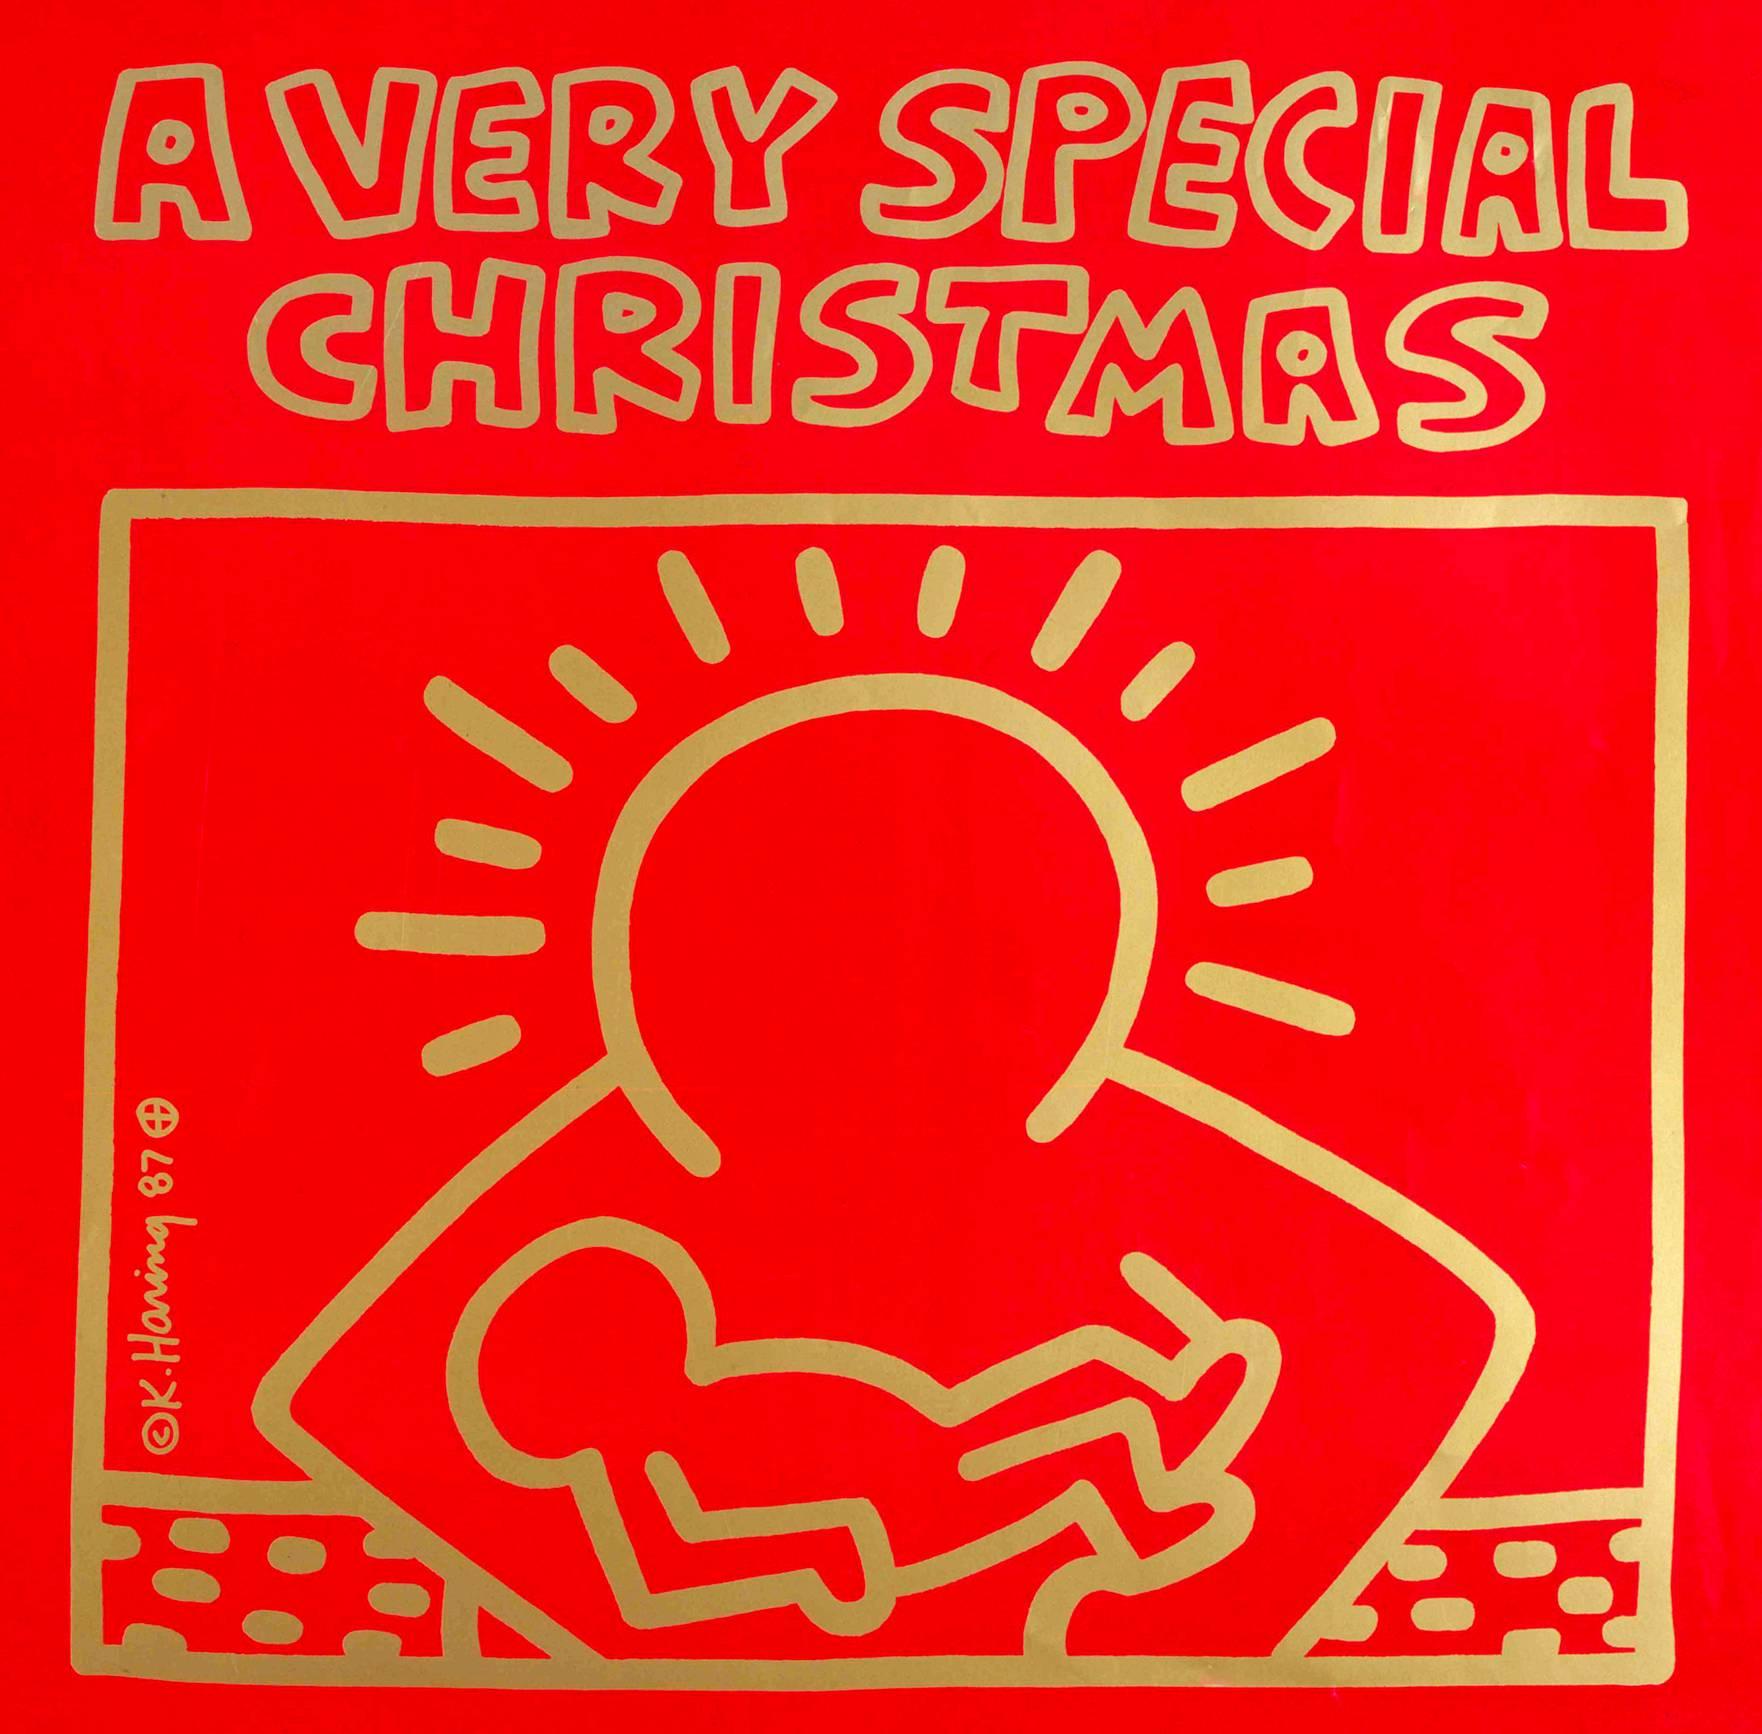 Original 1987 Vinyl Record Art by Keith Haring:

Off-Set Lithograph on vinyl record jacket; engraved gold foil.
12 x 12 inches.
Printed Haring signature on the mid lower left.

Very good overall vintage condition.

Includes the original record &